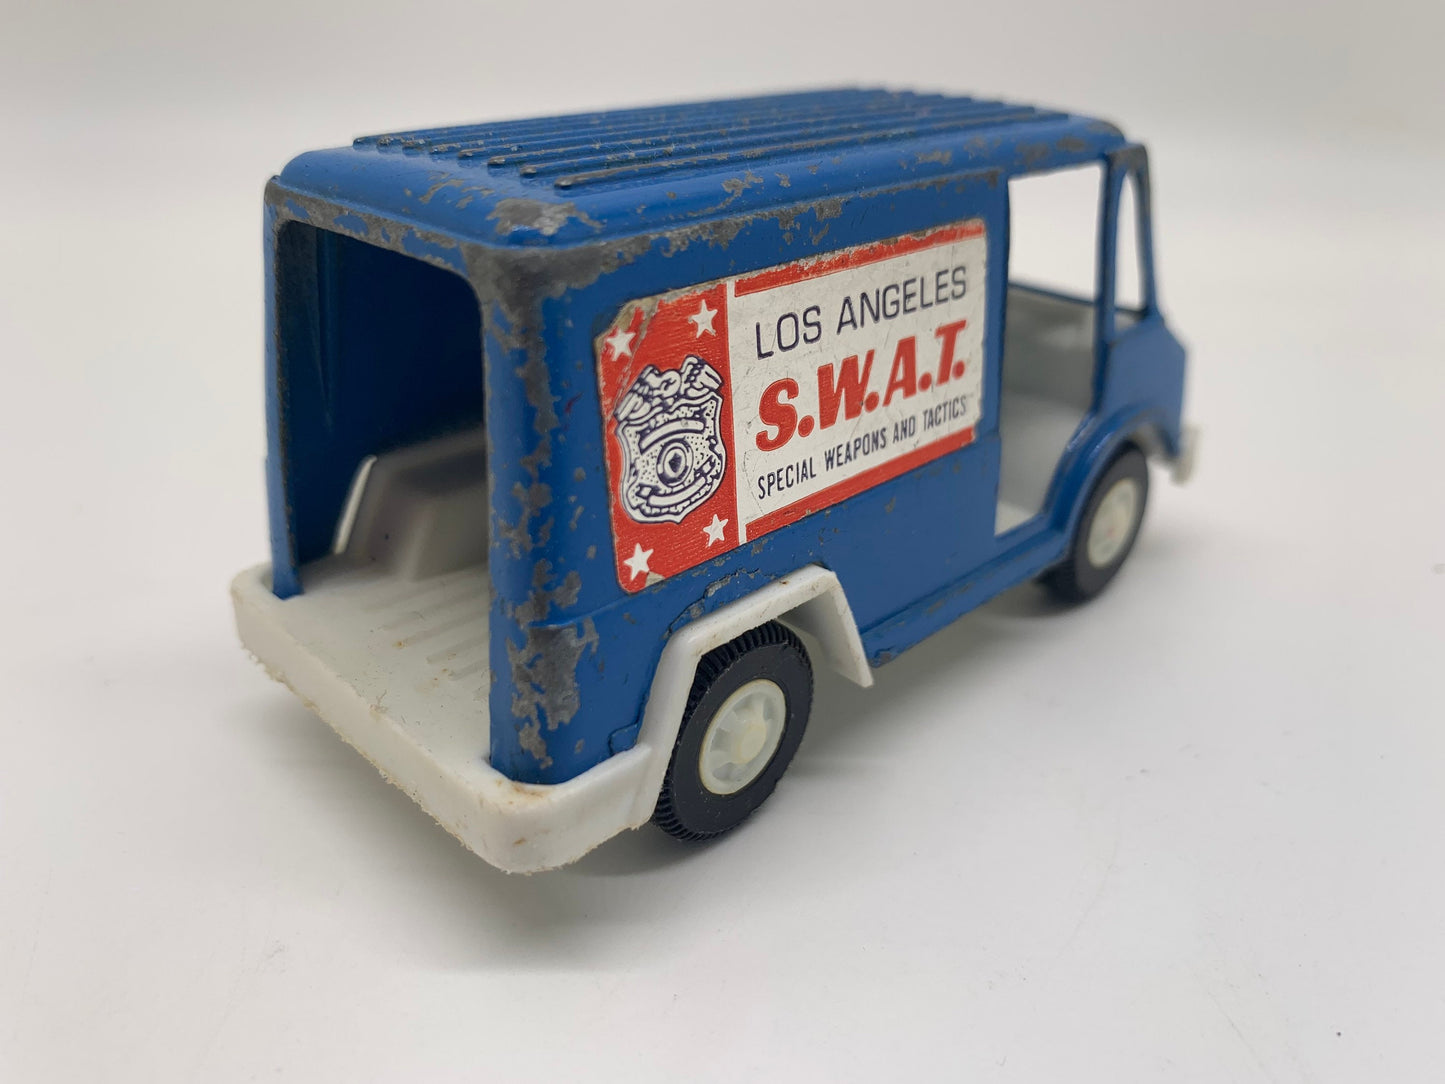 Tootsietoy Los Angeles SWAT Ranel Truck Blue Perfect Birthday Gift Miniature Collectible Scale Model Toy Car